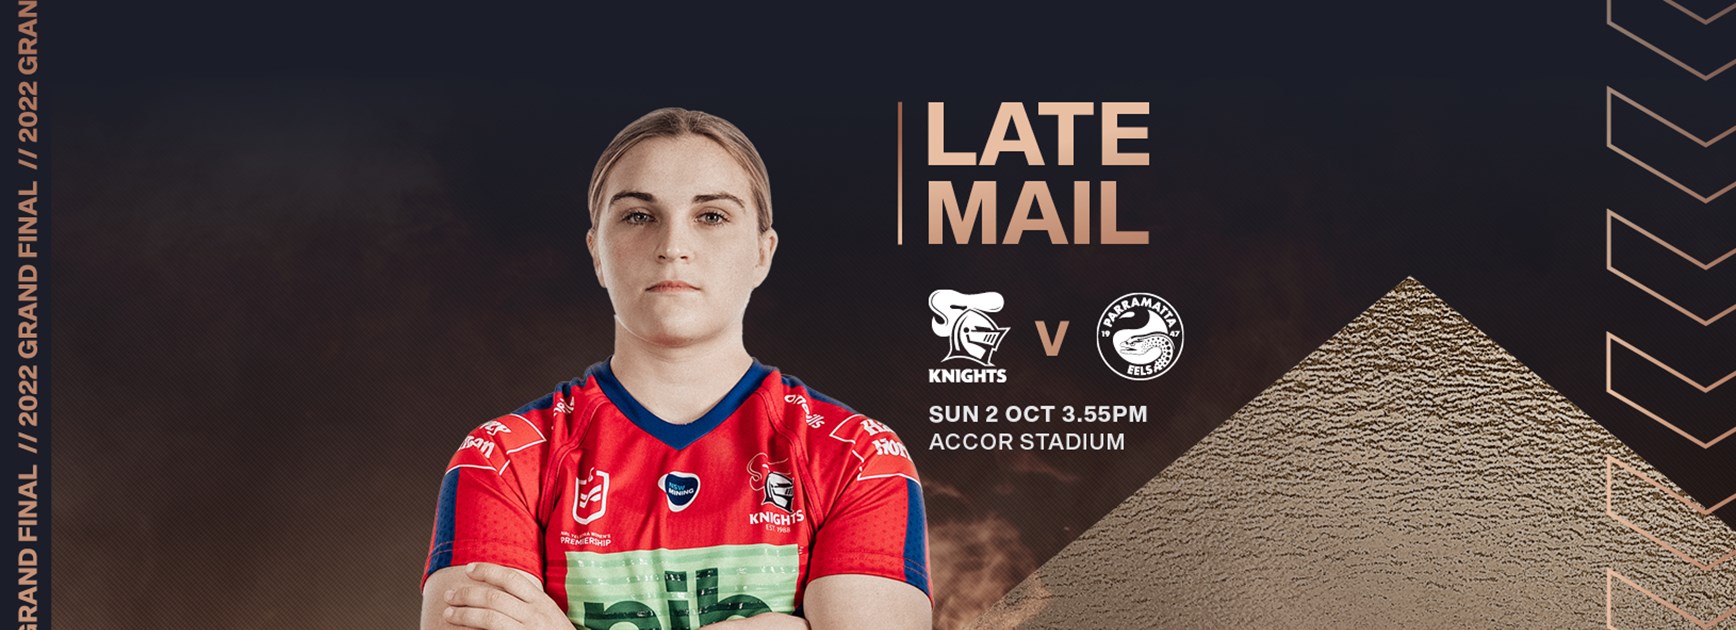 Late Mail: Knights v Eels Grand Final